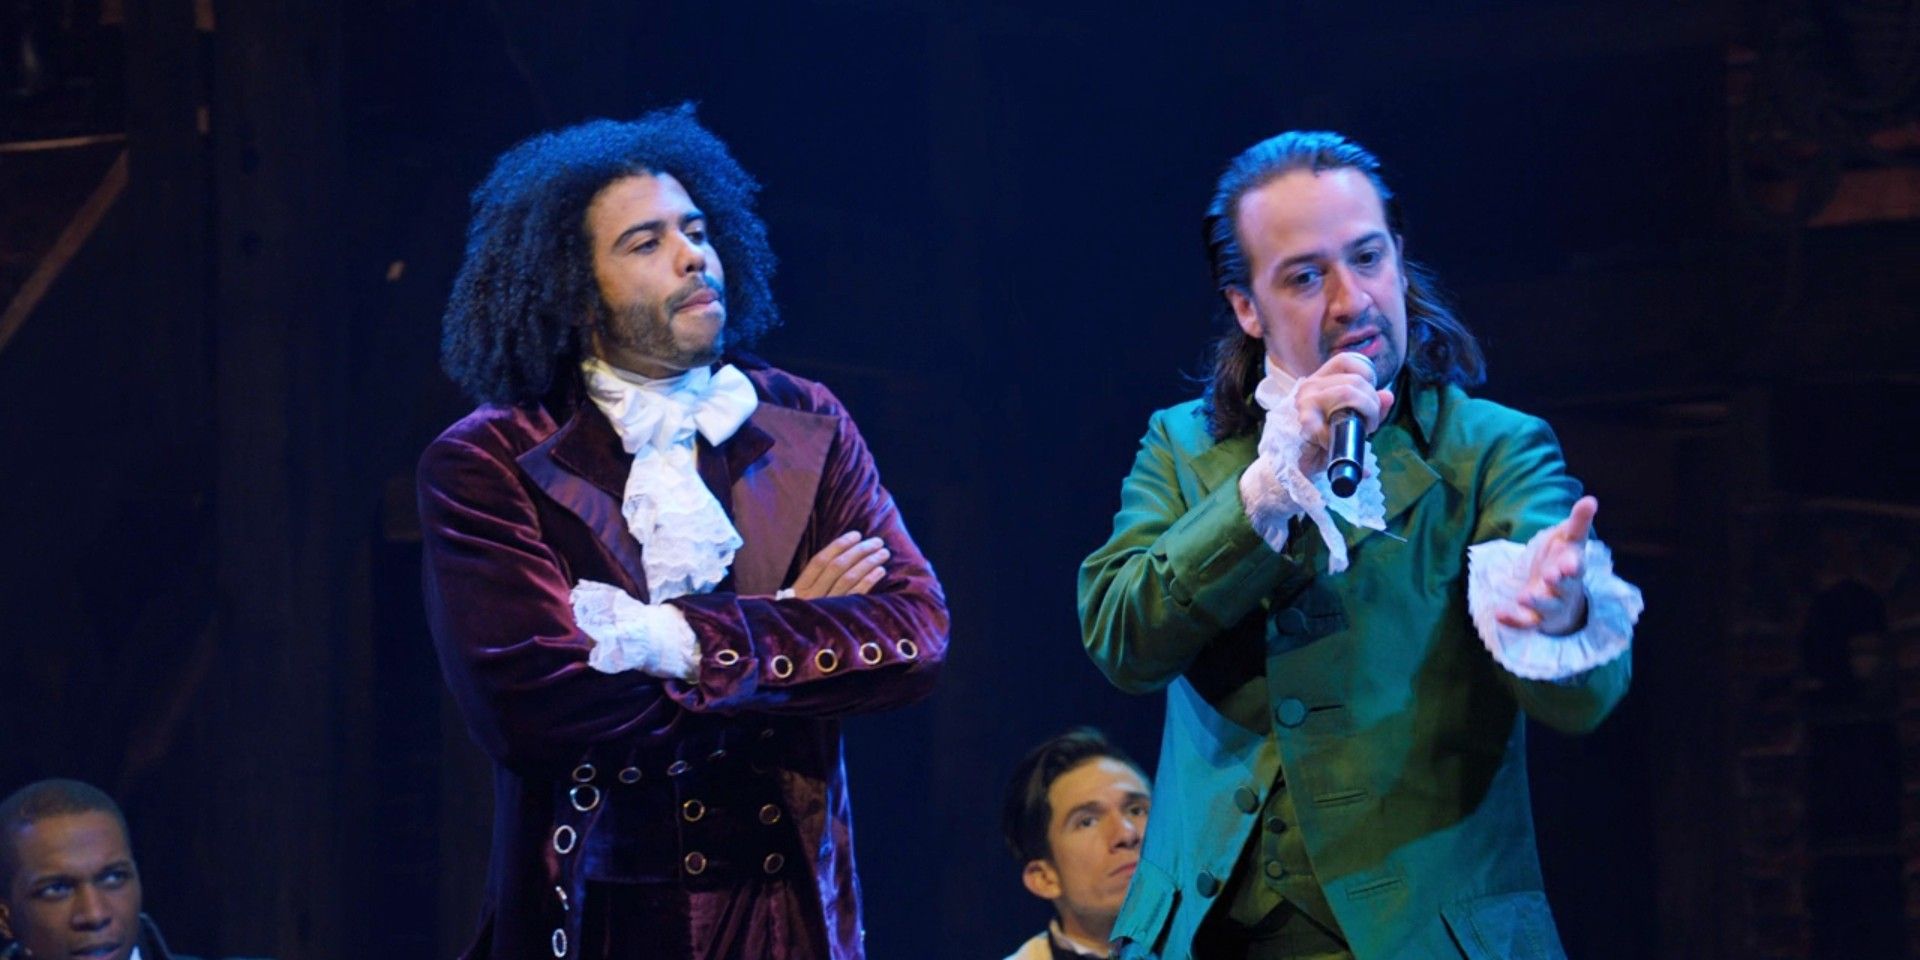 Hamilton All 46 Songs In The Musical Ranked From Worst To Best